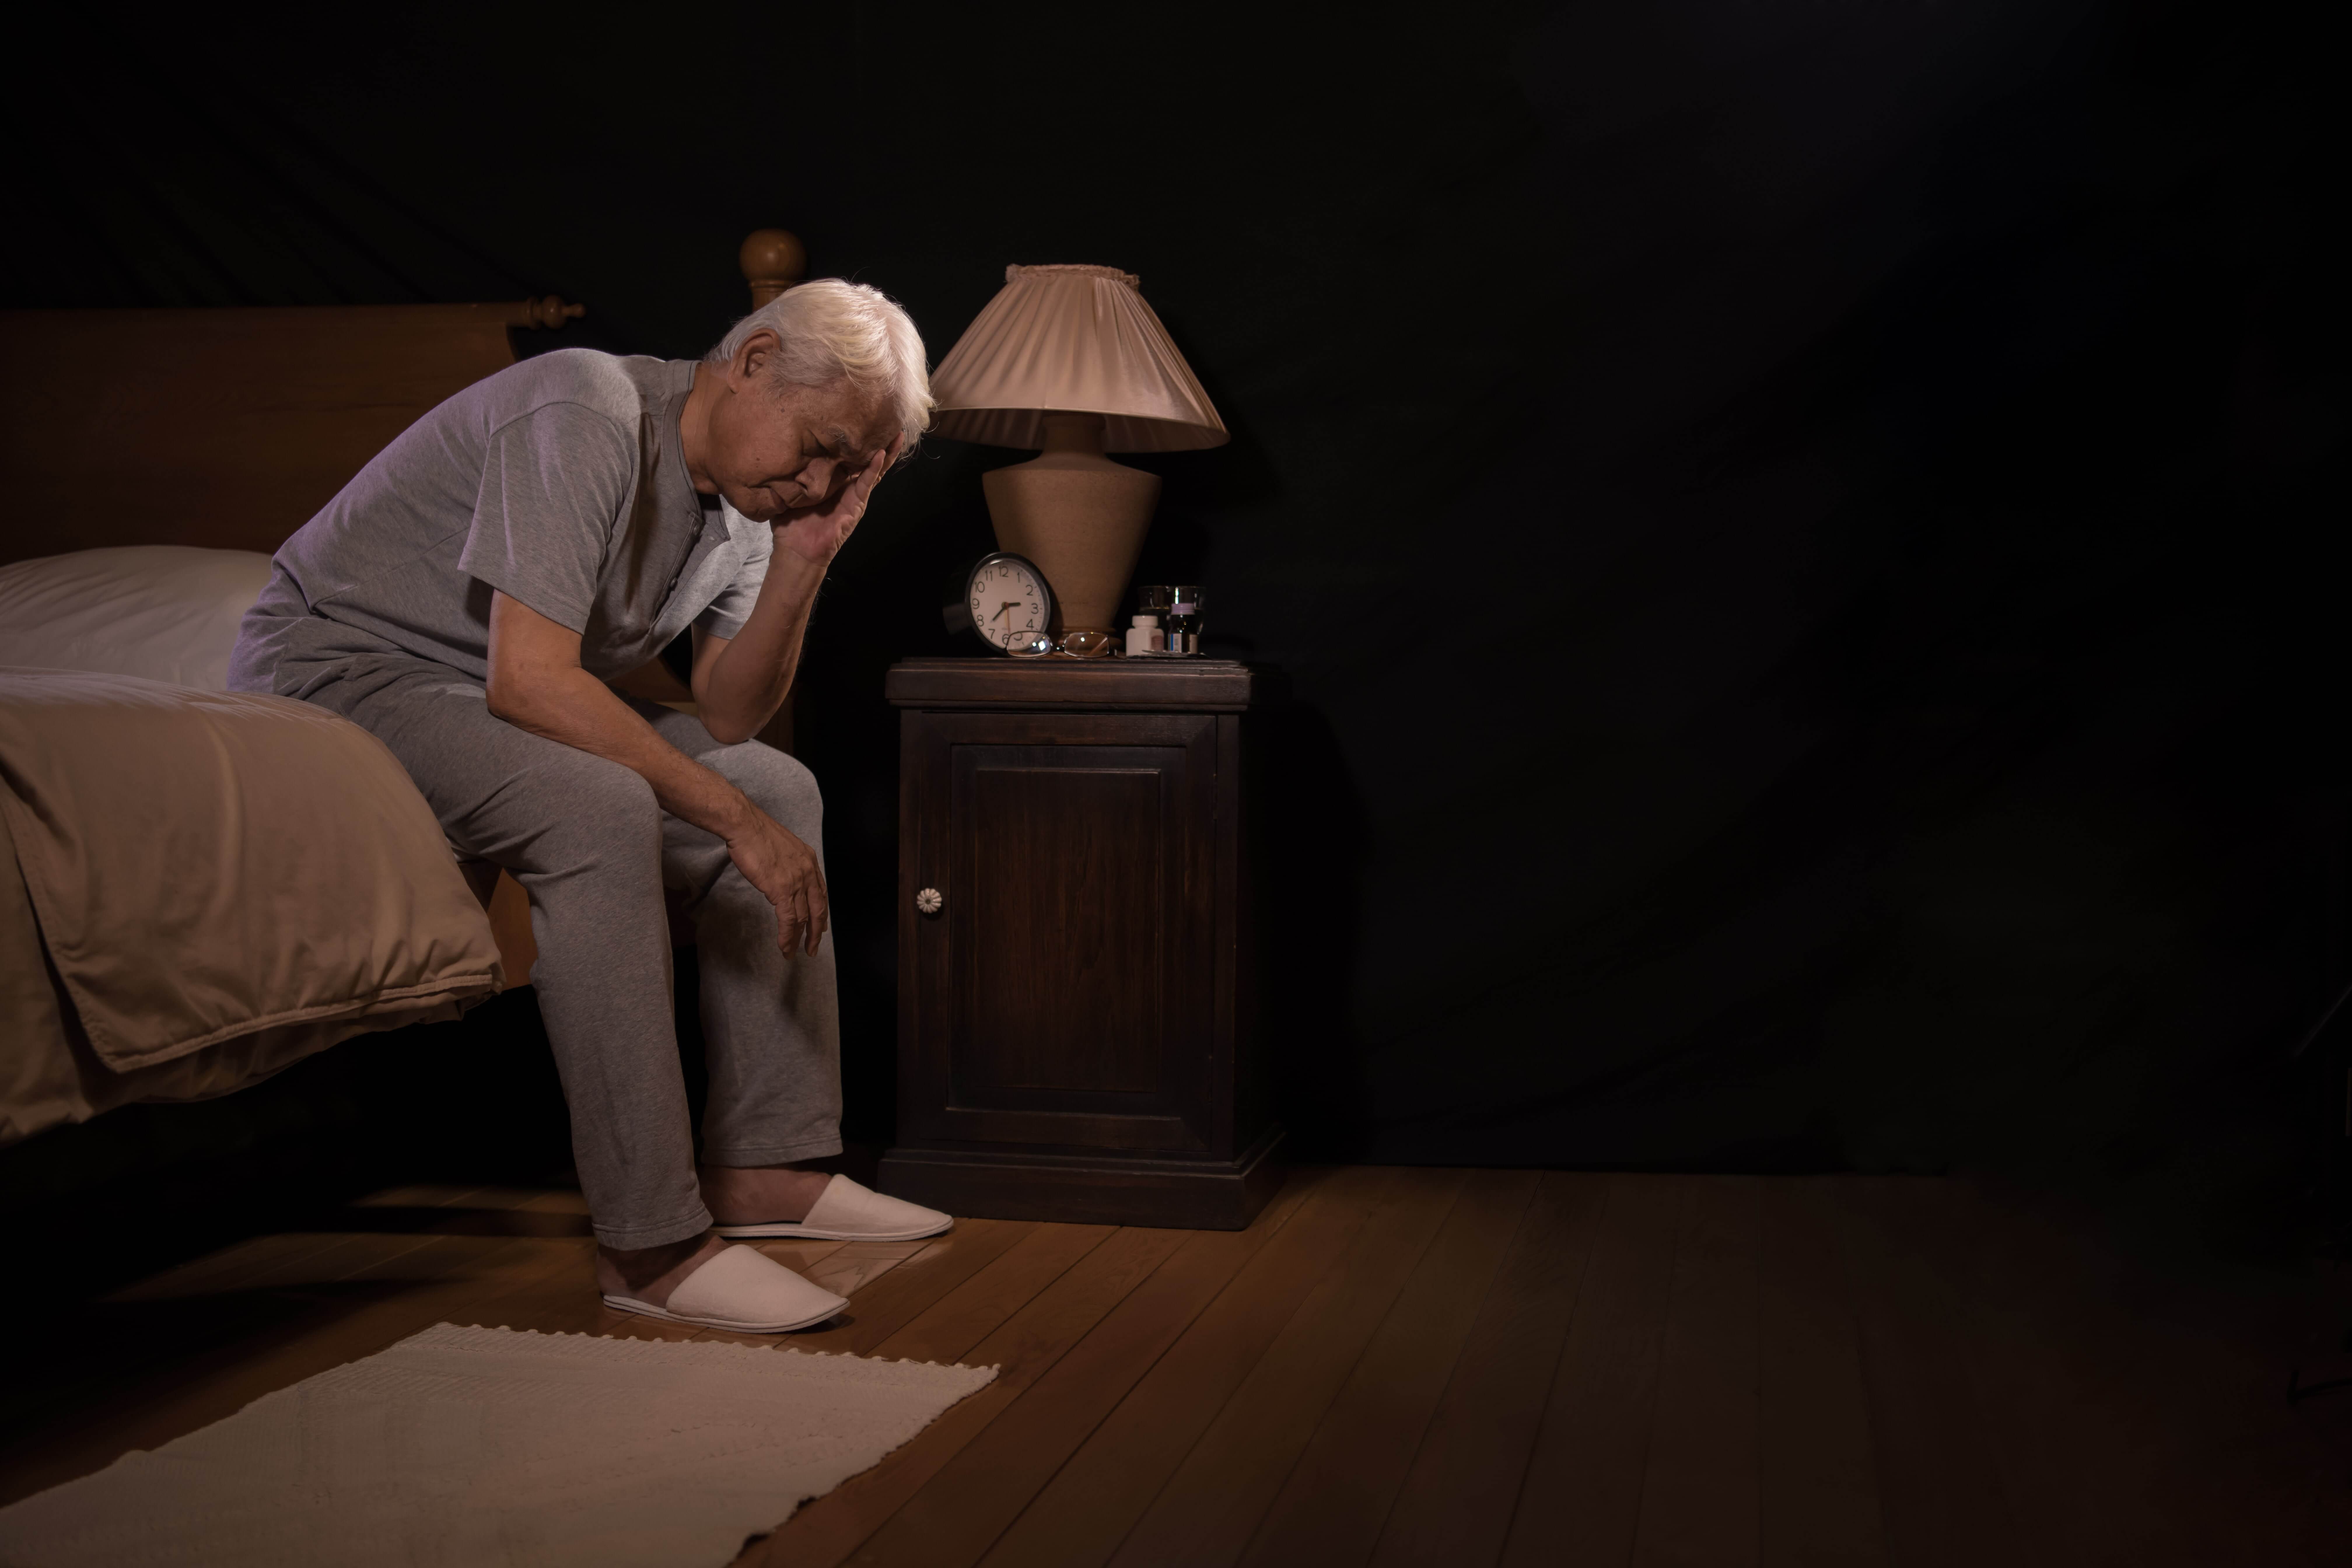 isolated older adult struggling with depression